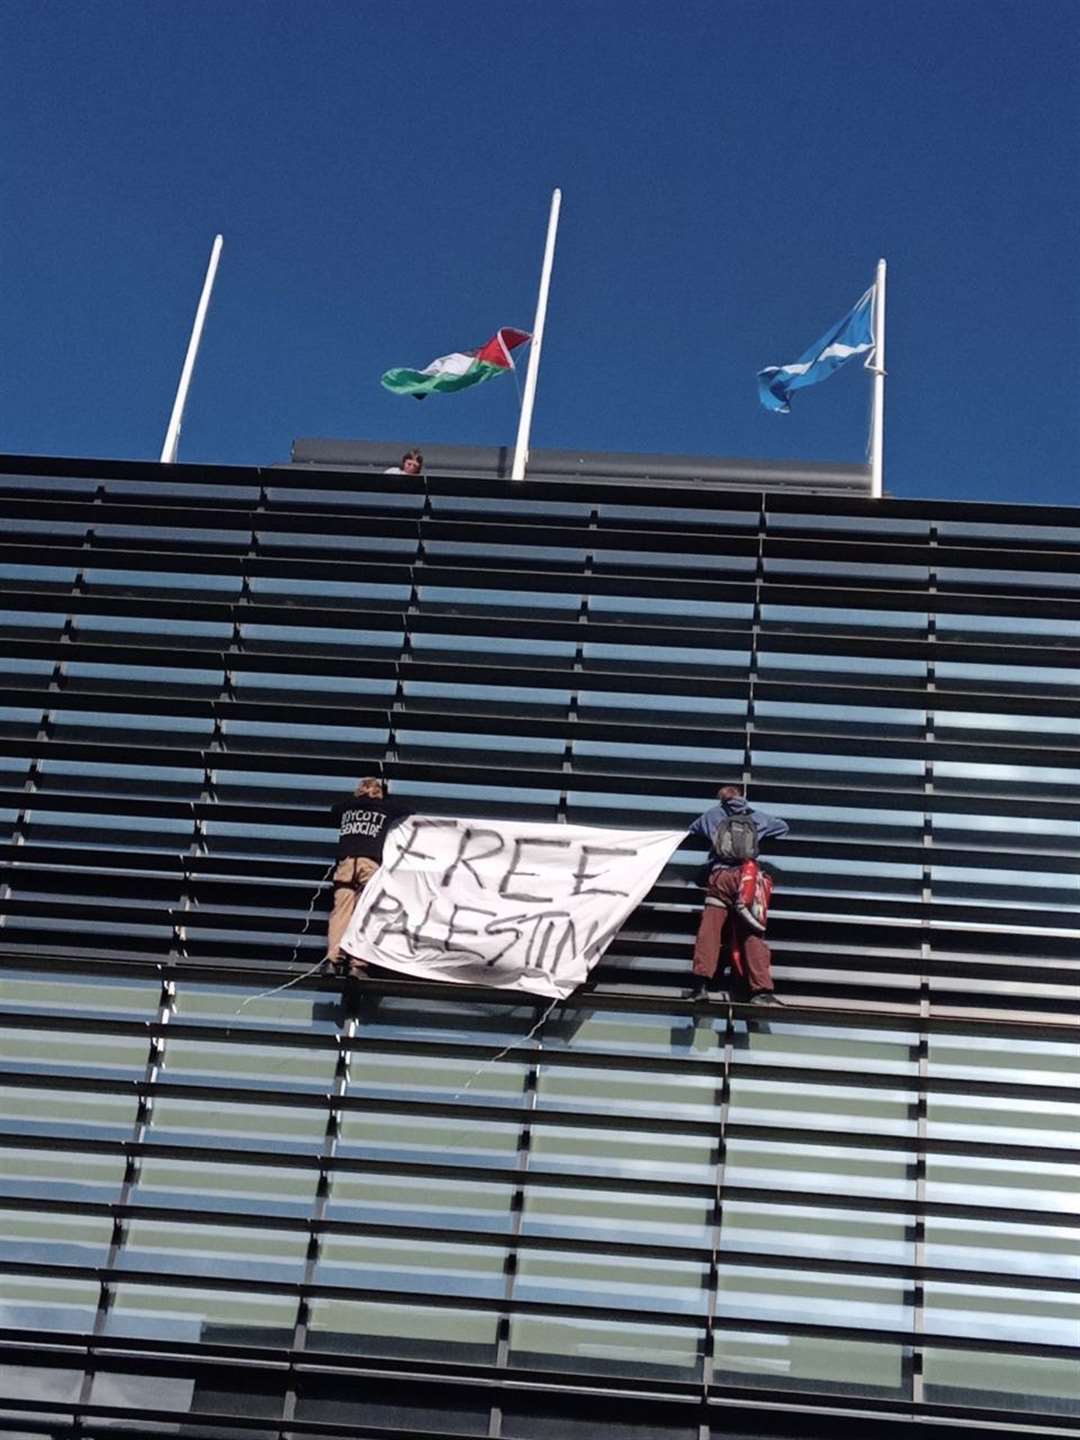 Activists unfurled a Palestinian flag on the roof of the UK Government building (This Is Rigged/PA)